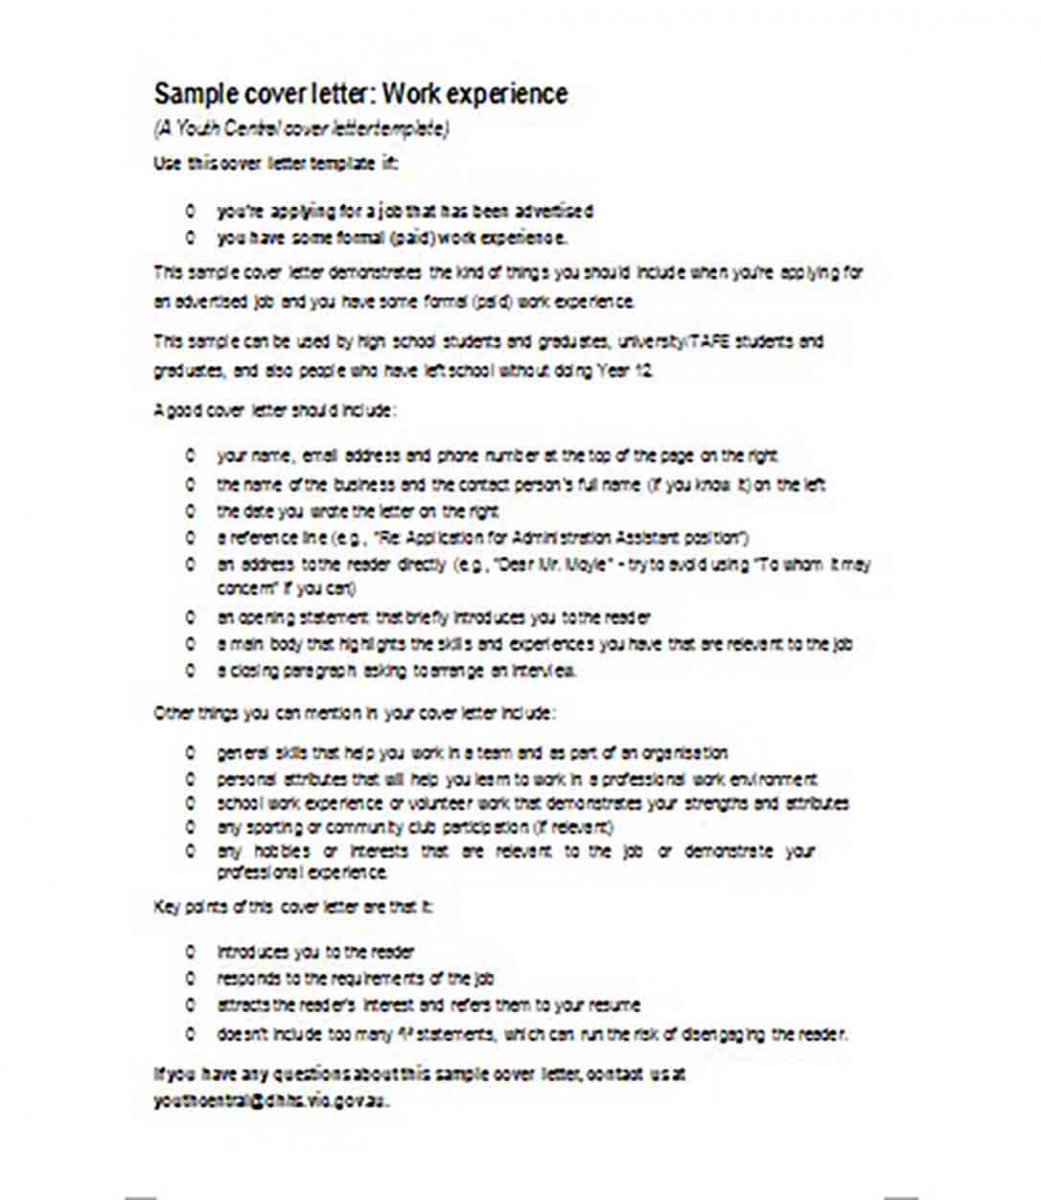 Administrative Assistant Work Experience Cover Letter